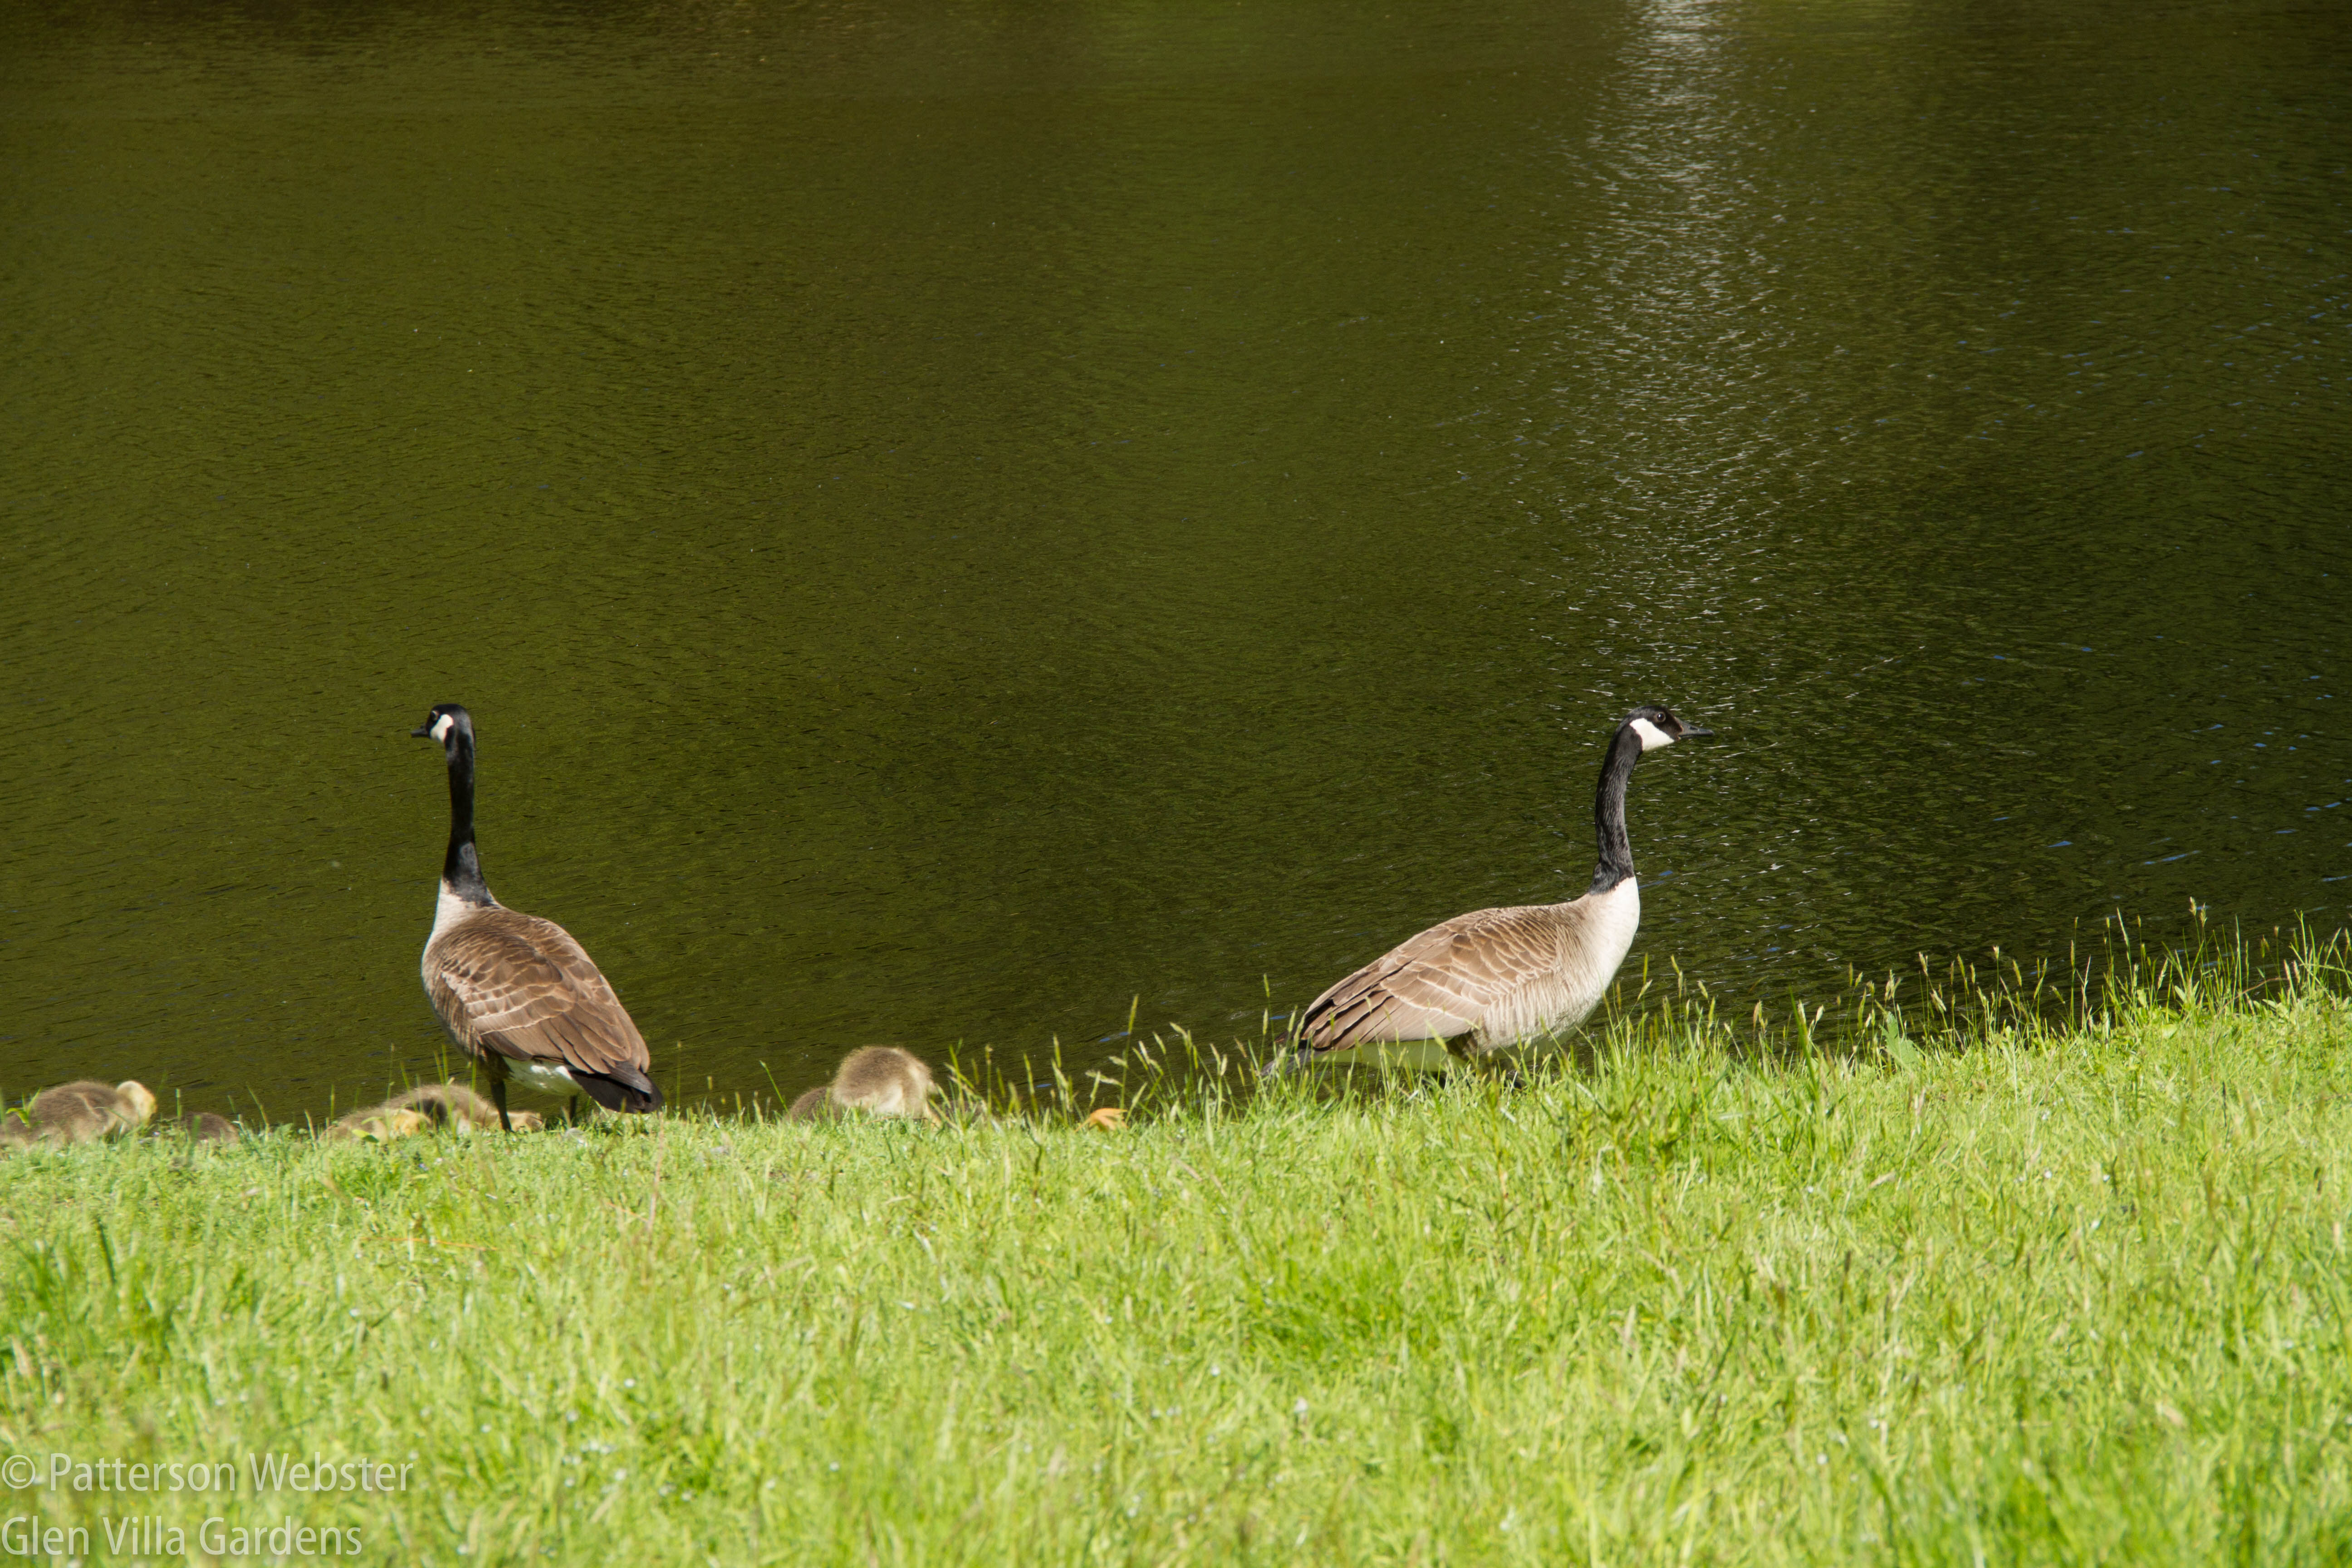 I often saw the parents standing like this, on either side of the gaggle of goslings, looking out for danger.